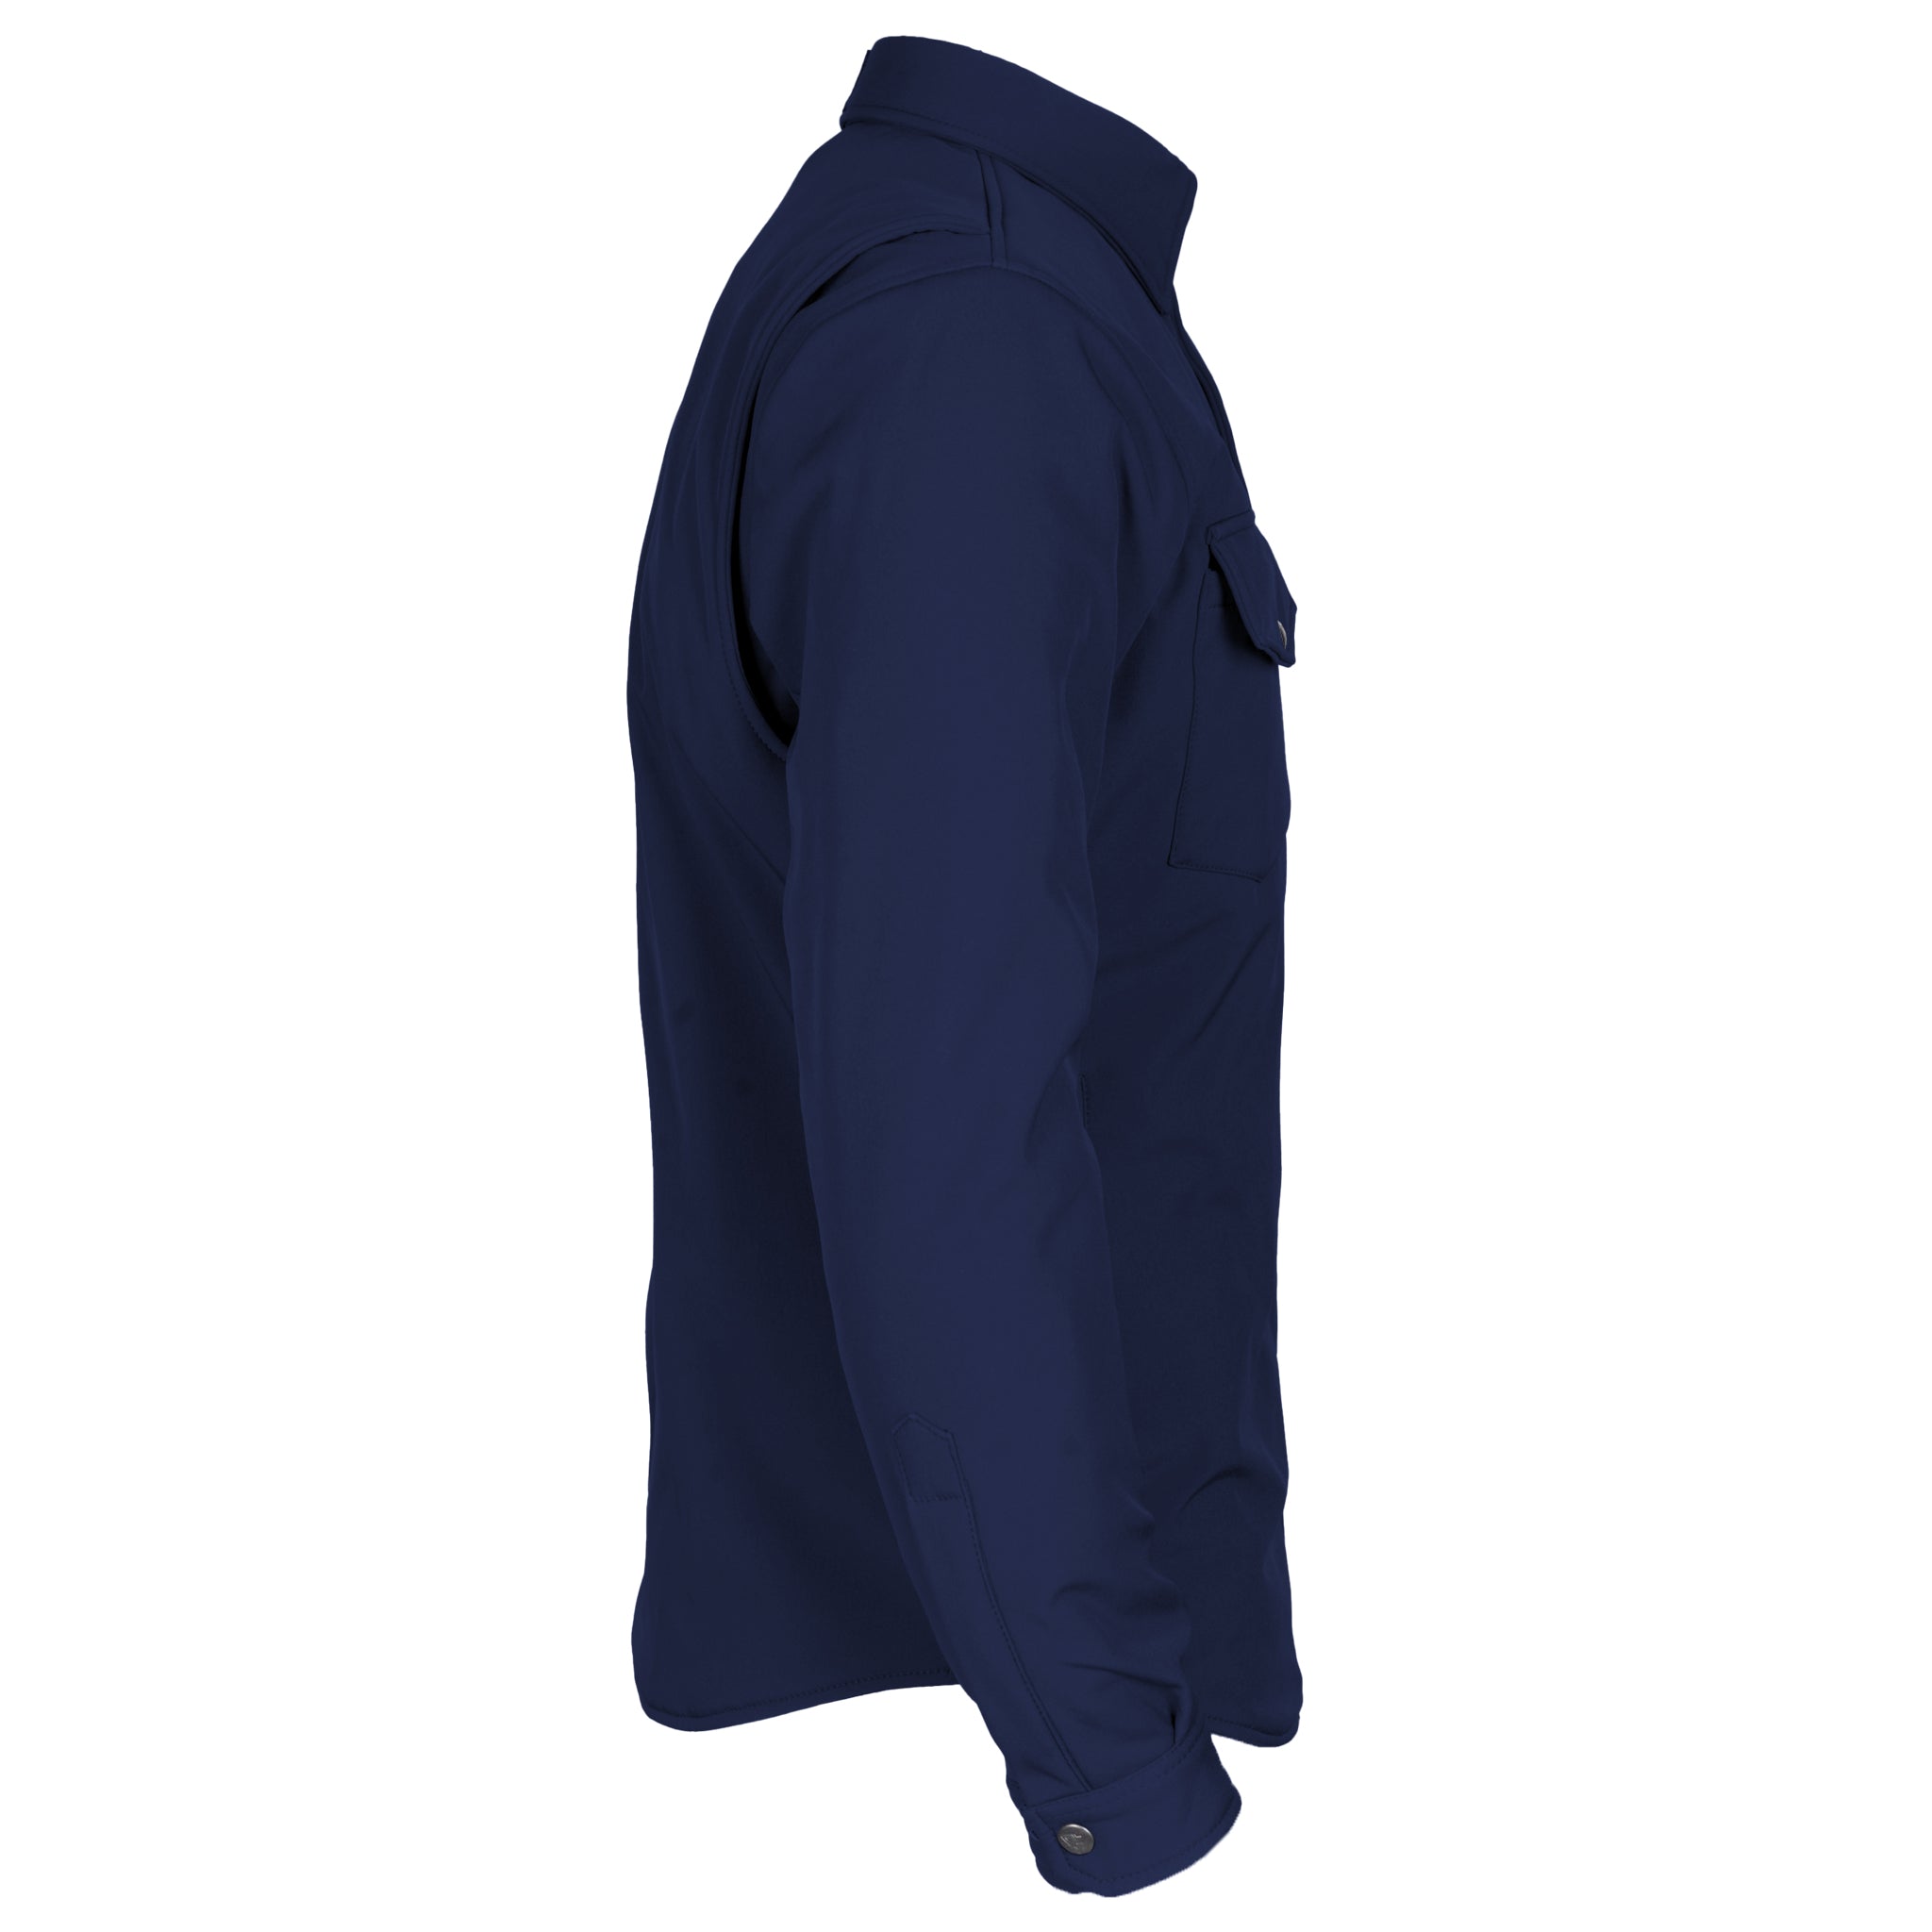 Protective SoftShell Winter Jacket for Men - Navy Blue Matte with Pads